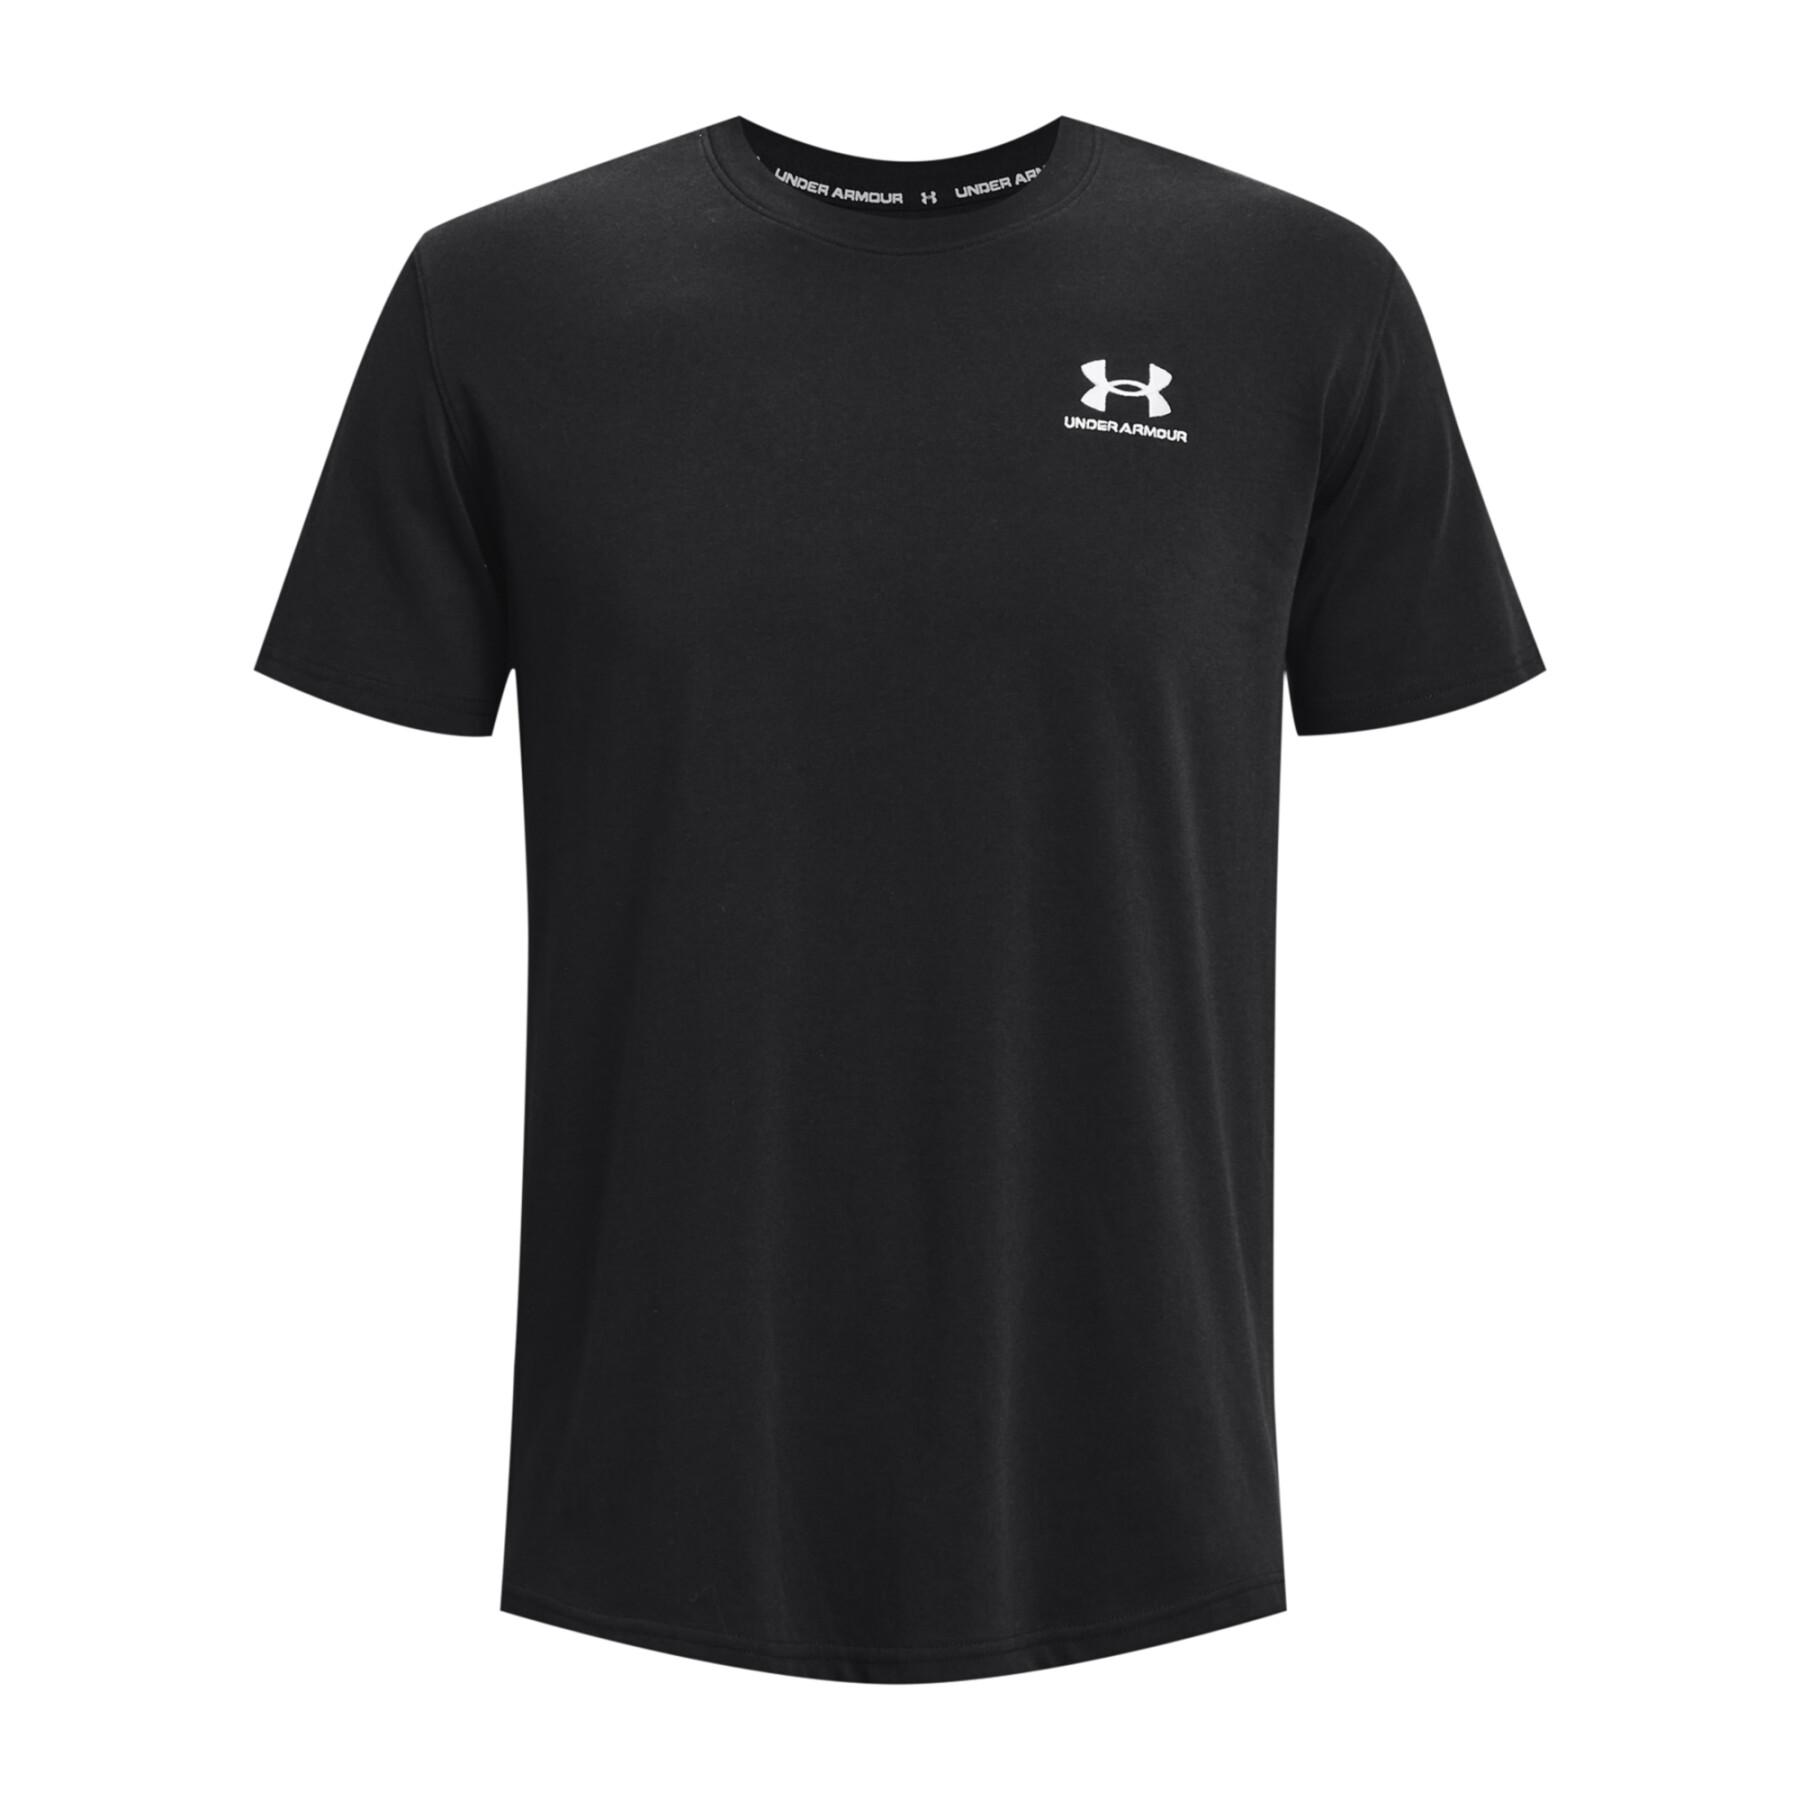 Thick T-shirt embroidered with logo Under Armour